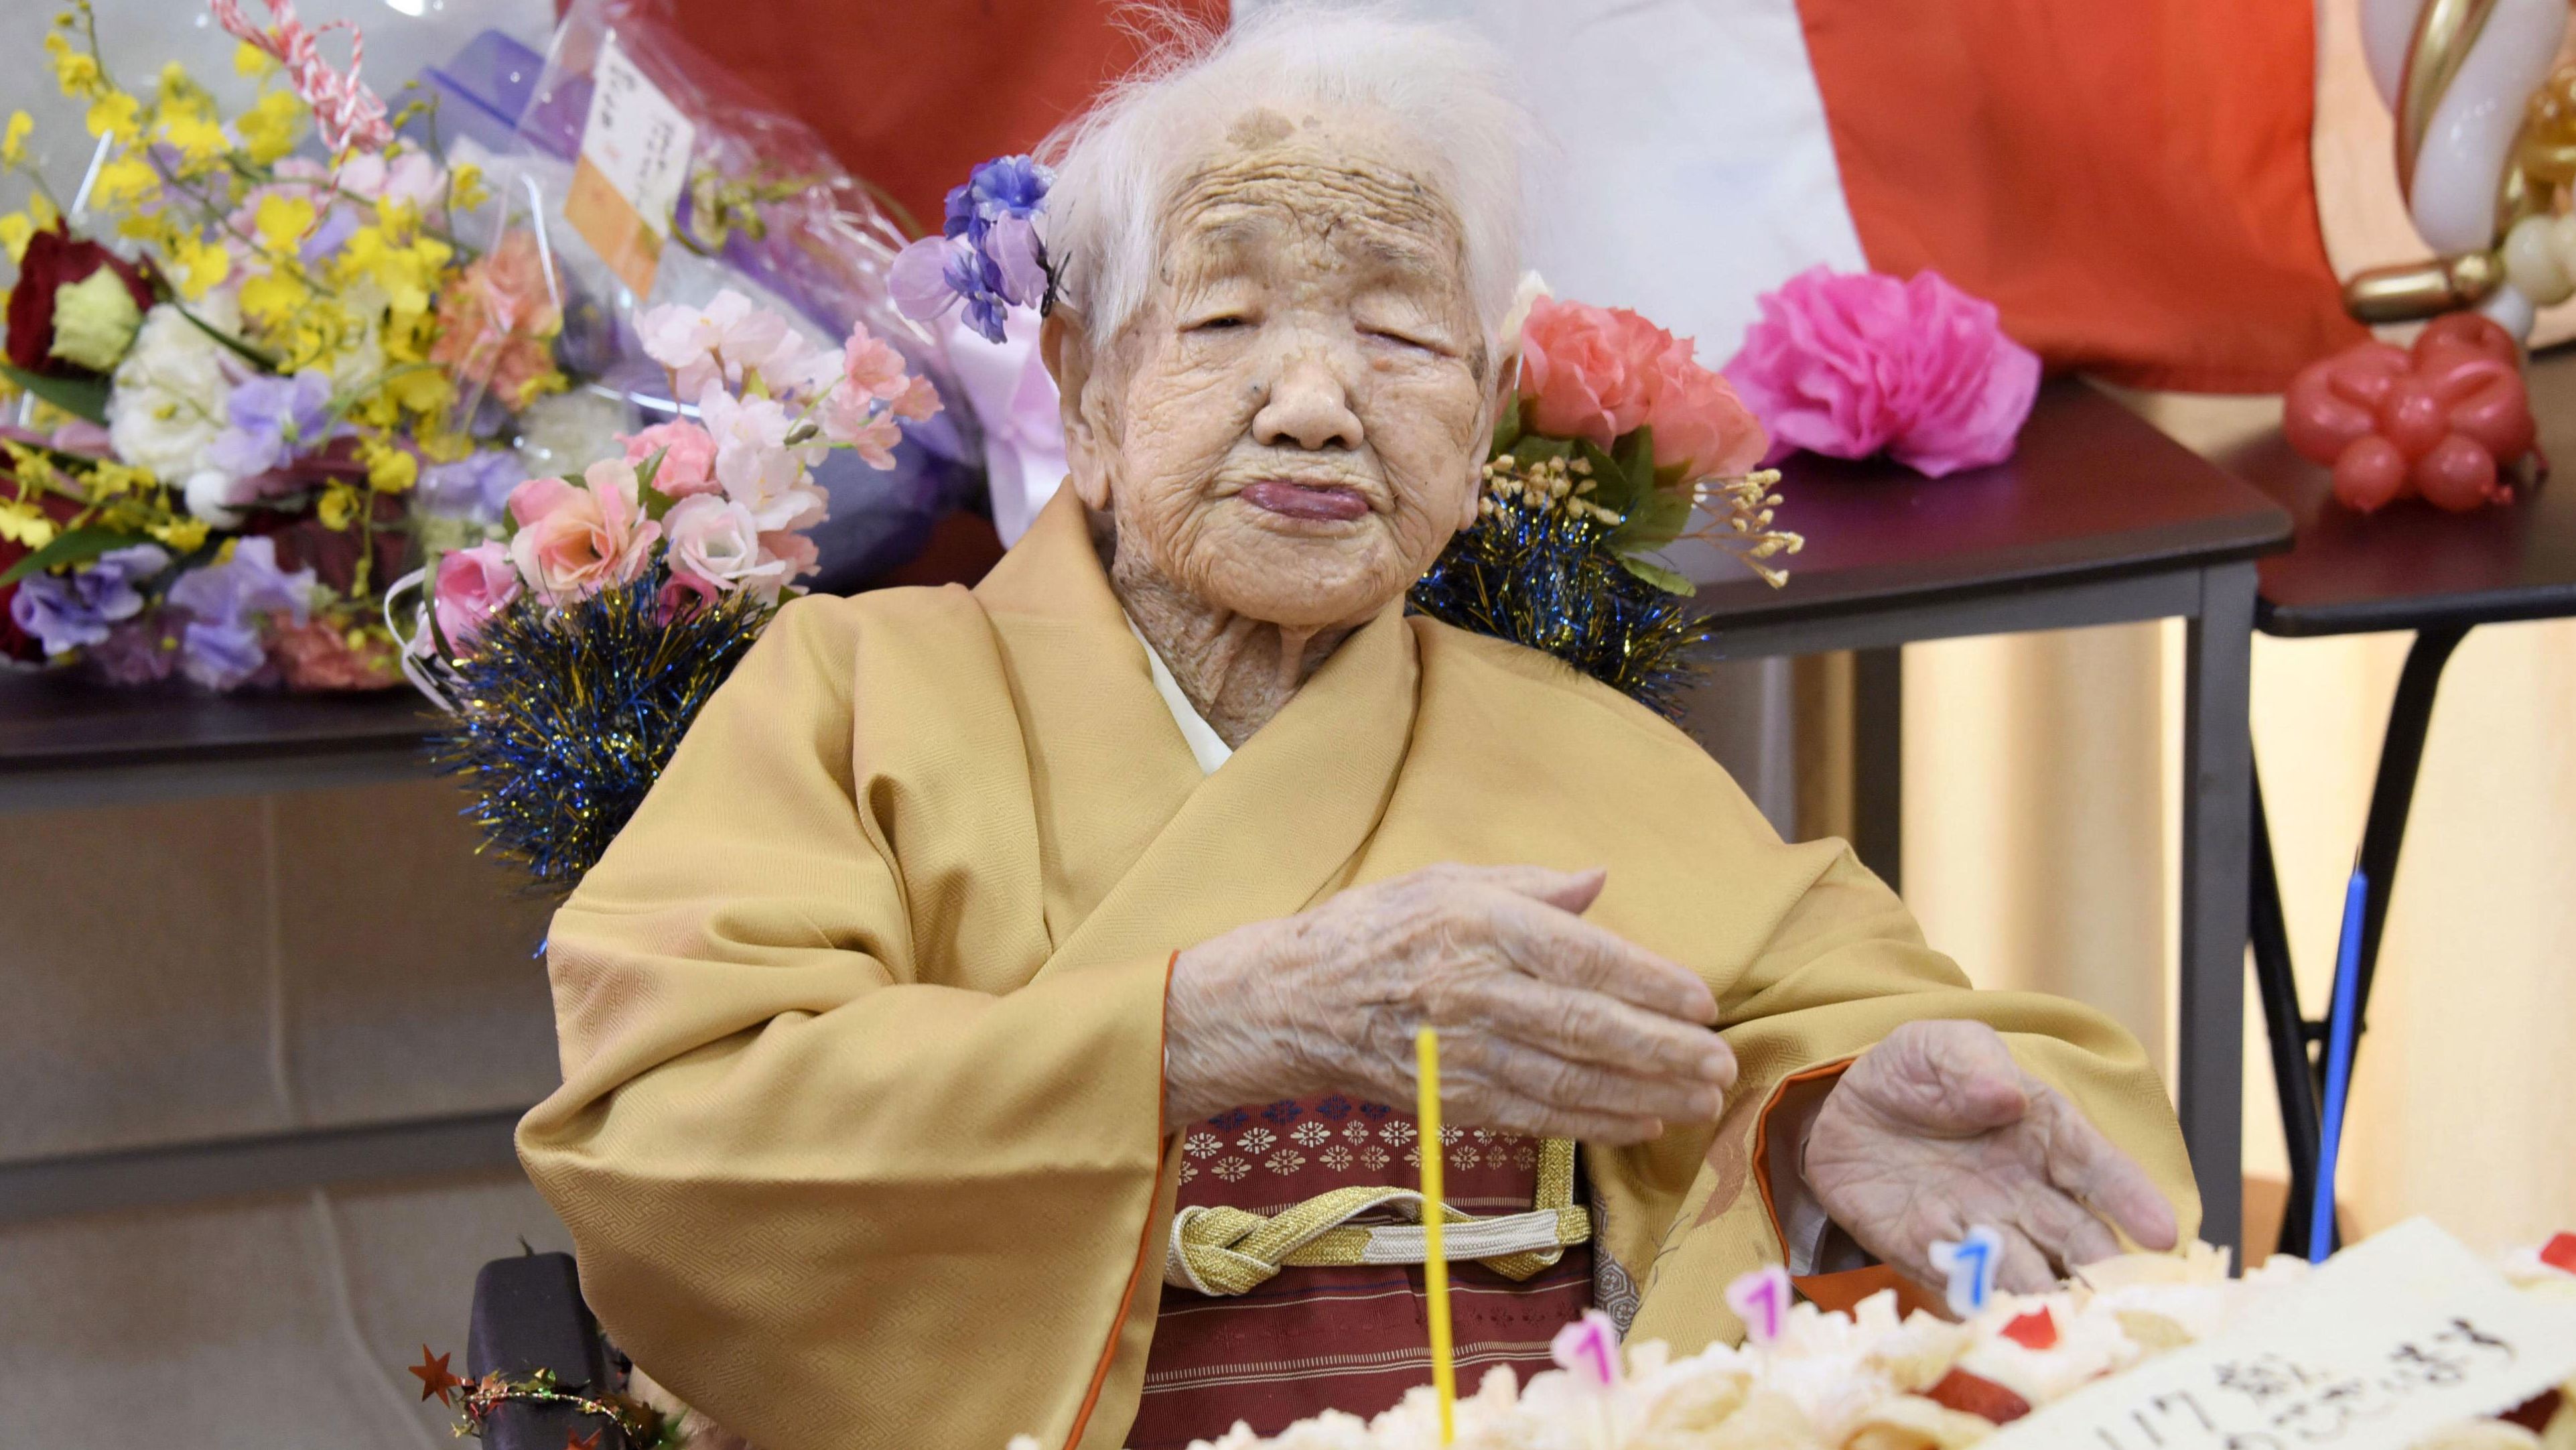 Japan's oldest person, 117-year-old Kane Tanaka, said the secret to a long life is eating good food and studying math.